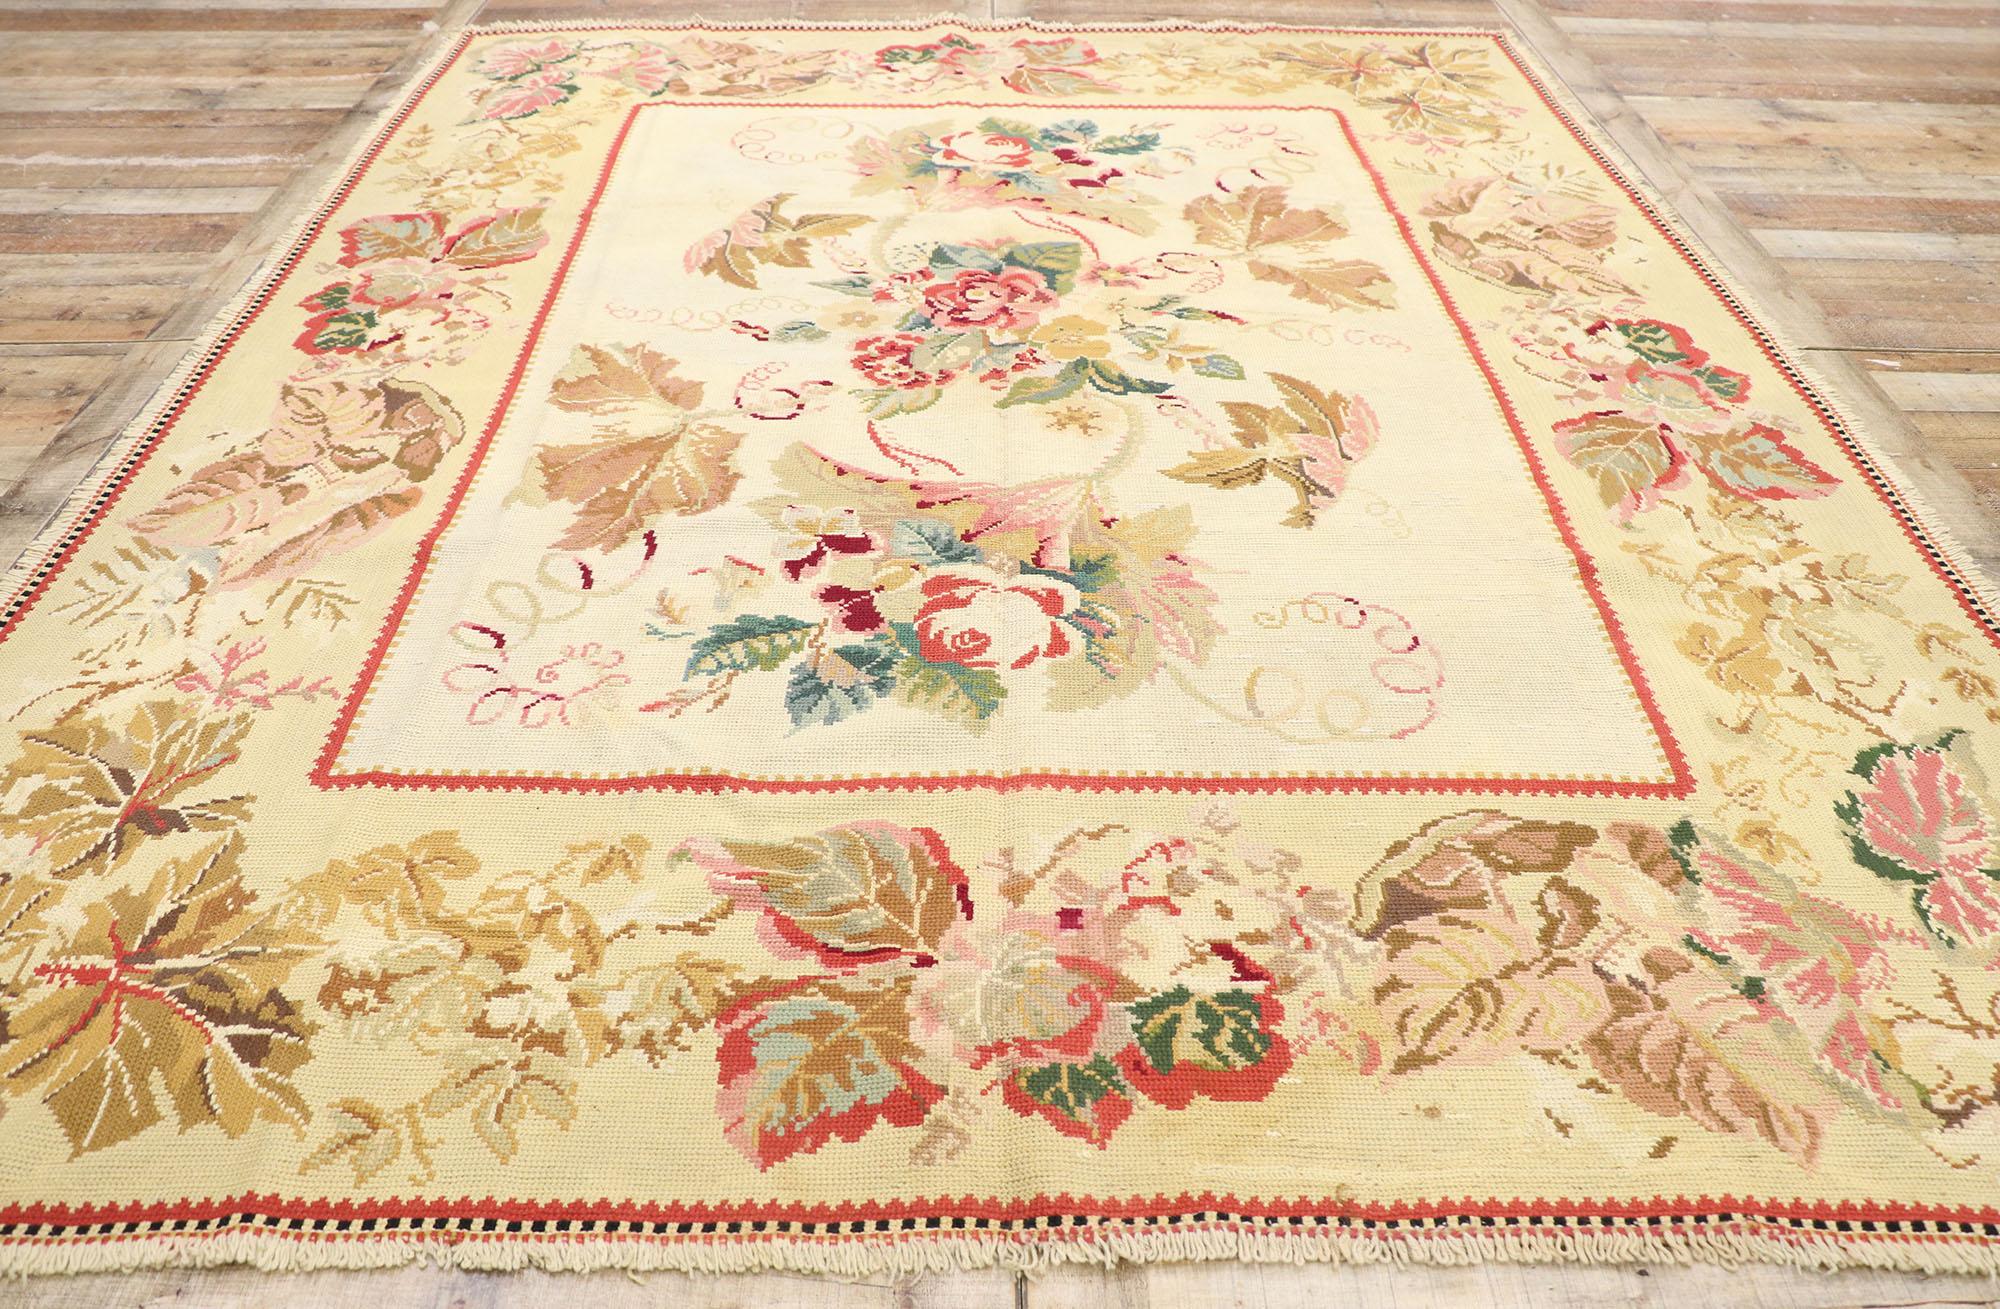 Antique Portuguese Arraiolos Needlepoint Rug with Romantic French Country Style In Good Condition For Sale In Dallas, TX